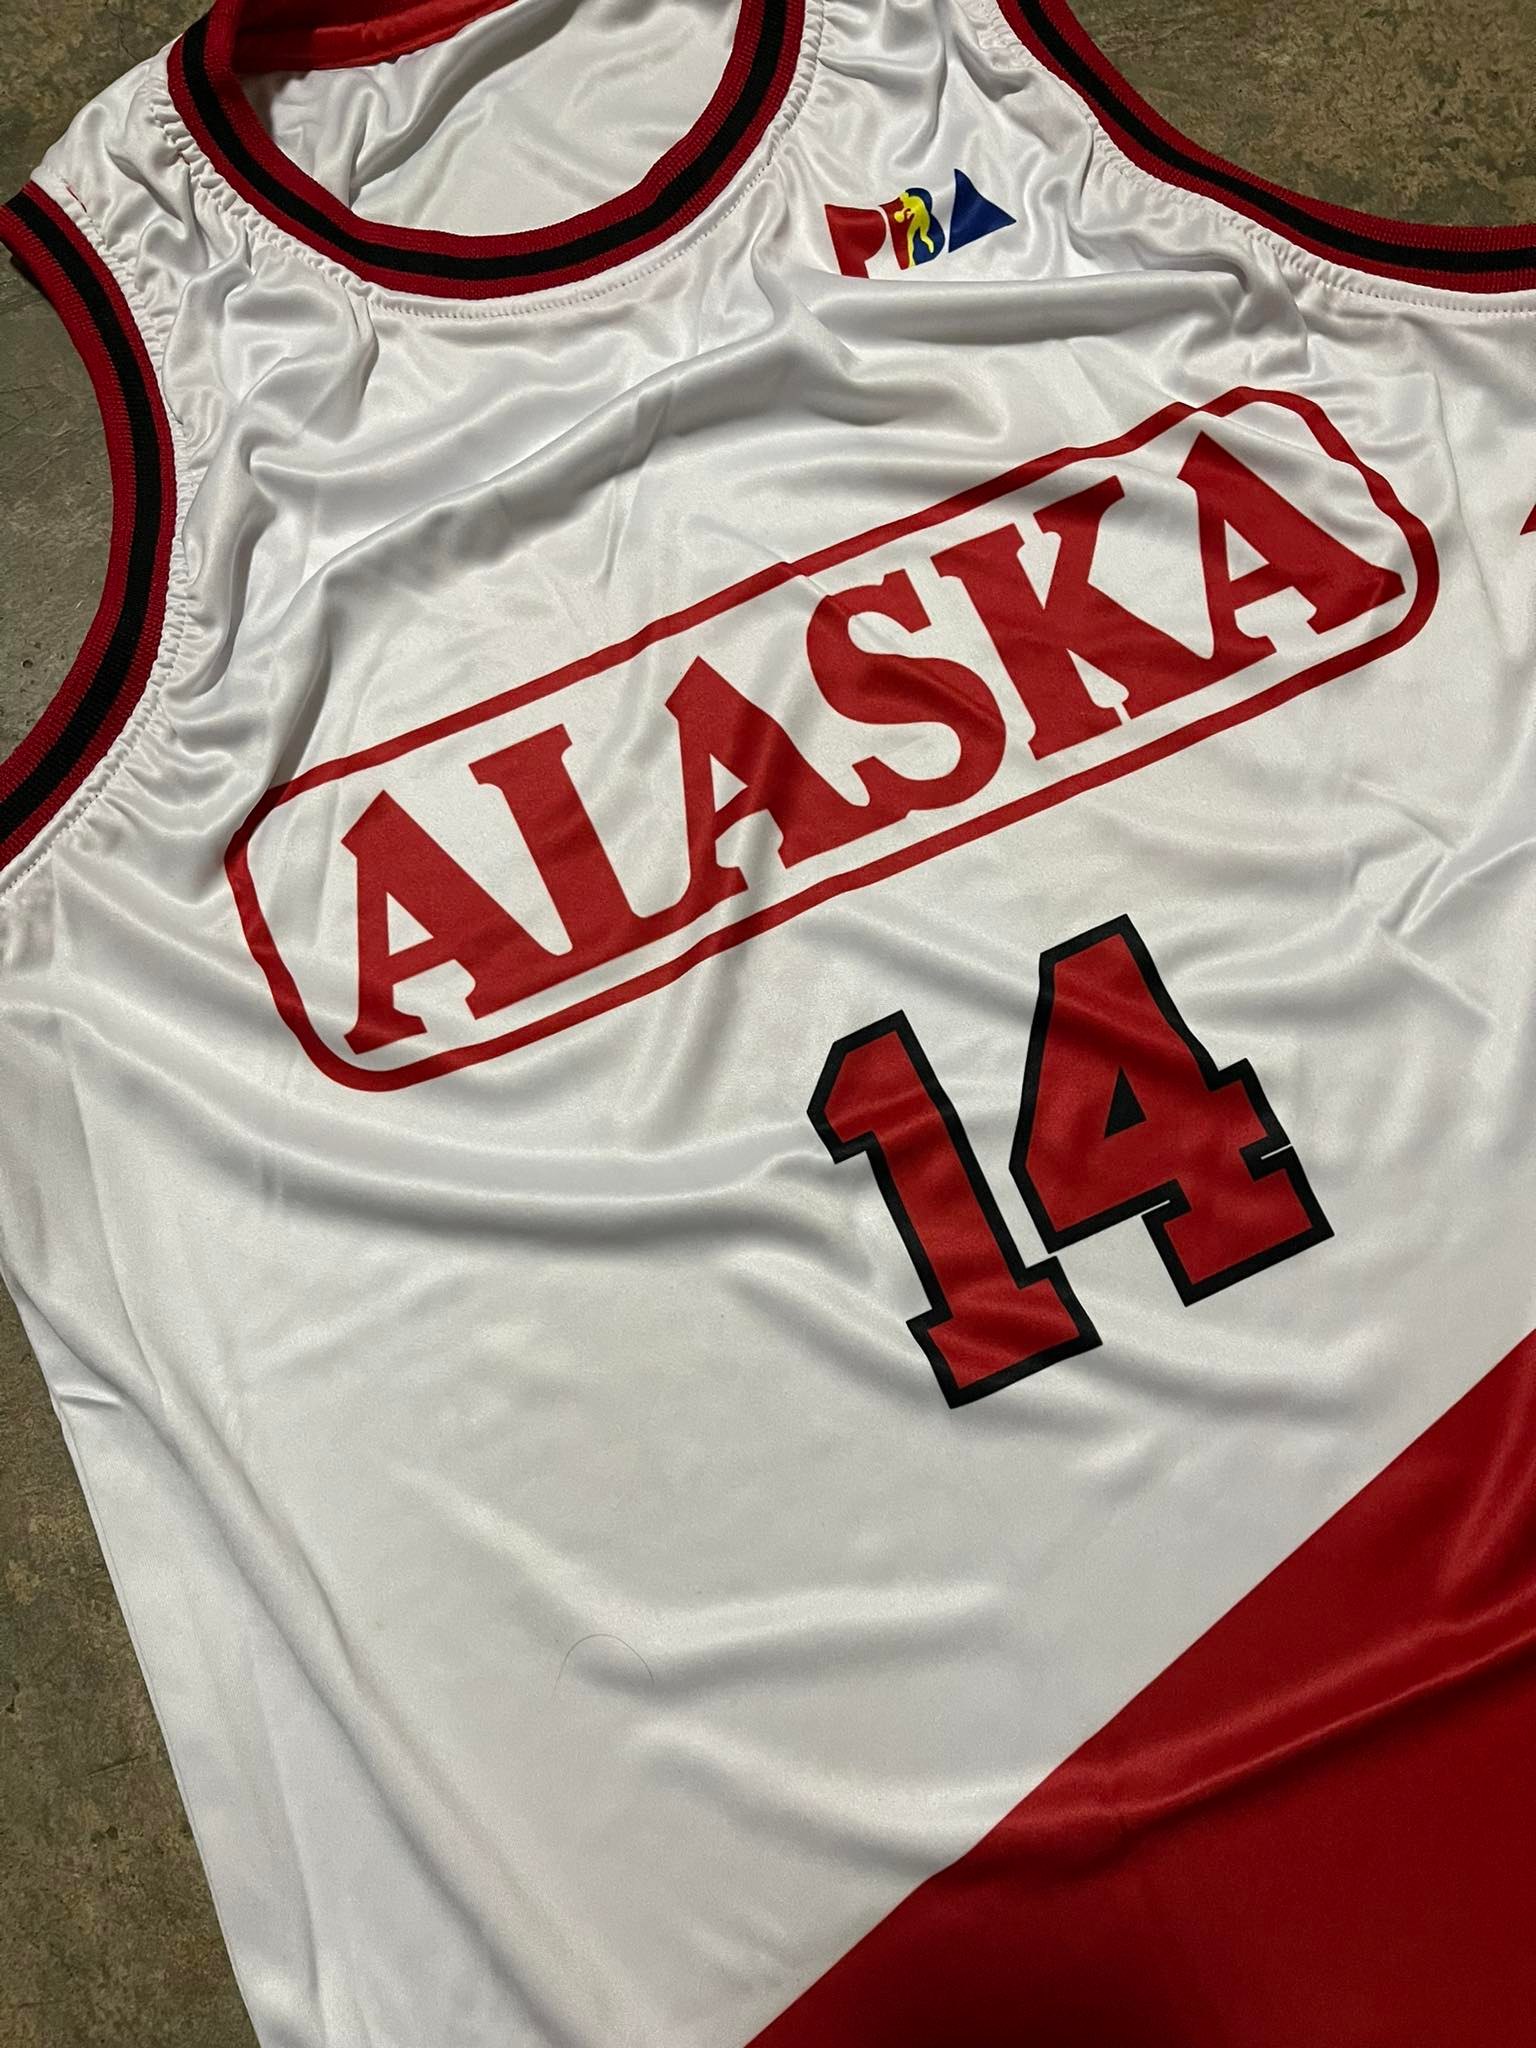 LIMITED Edition! JOHNNY ABARRIENTOS #14 LETTER CUT ALASKA PBA RETRO BUBBLE  Jersey #TheFLYING A #MvP